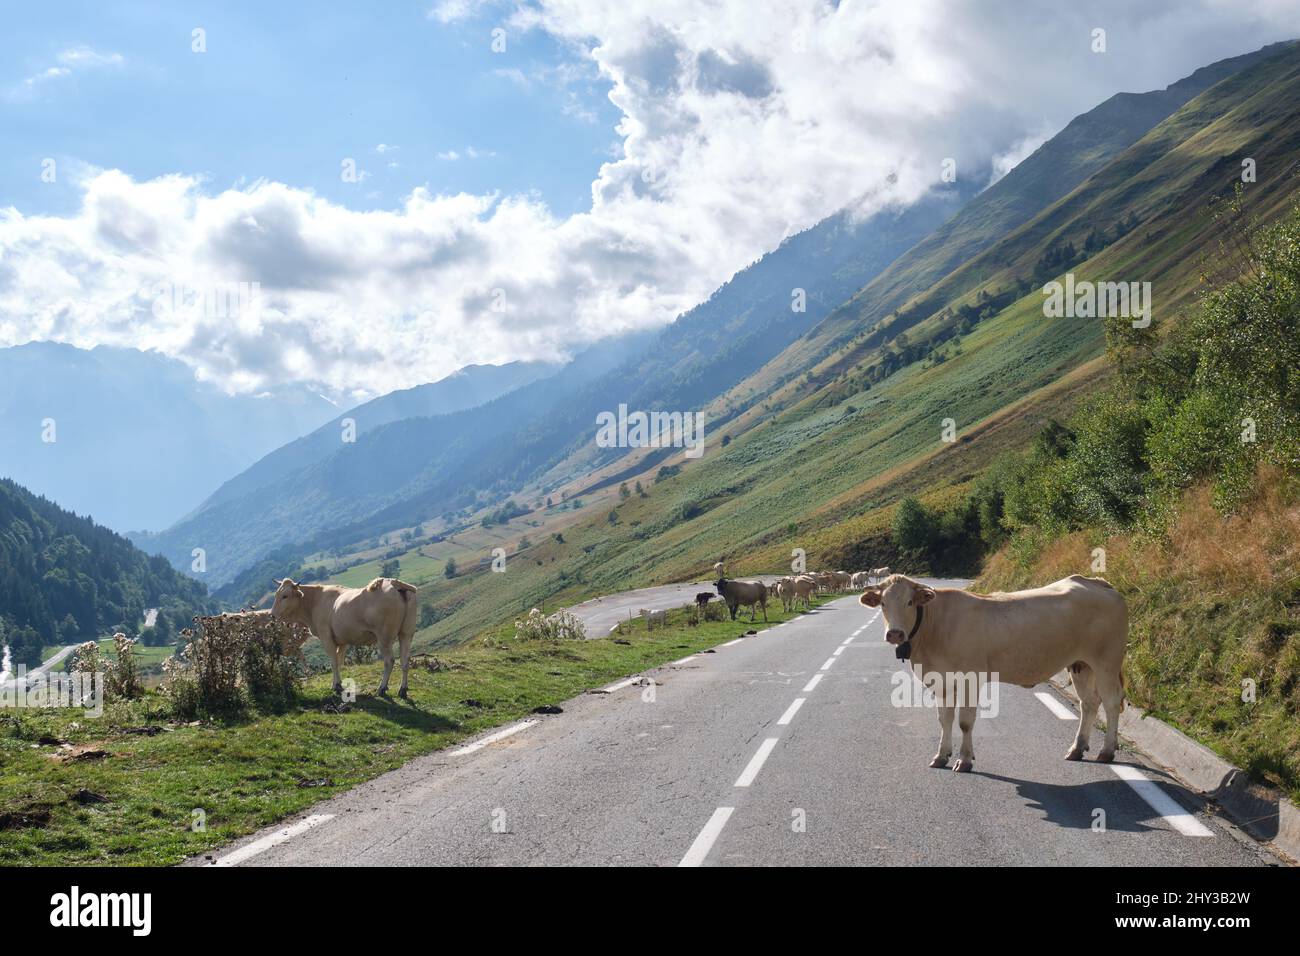 Herd of cows on a country road with mountains and clouds sky in the background Stock Photo